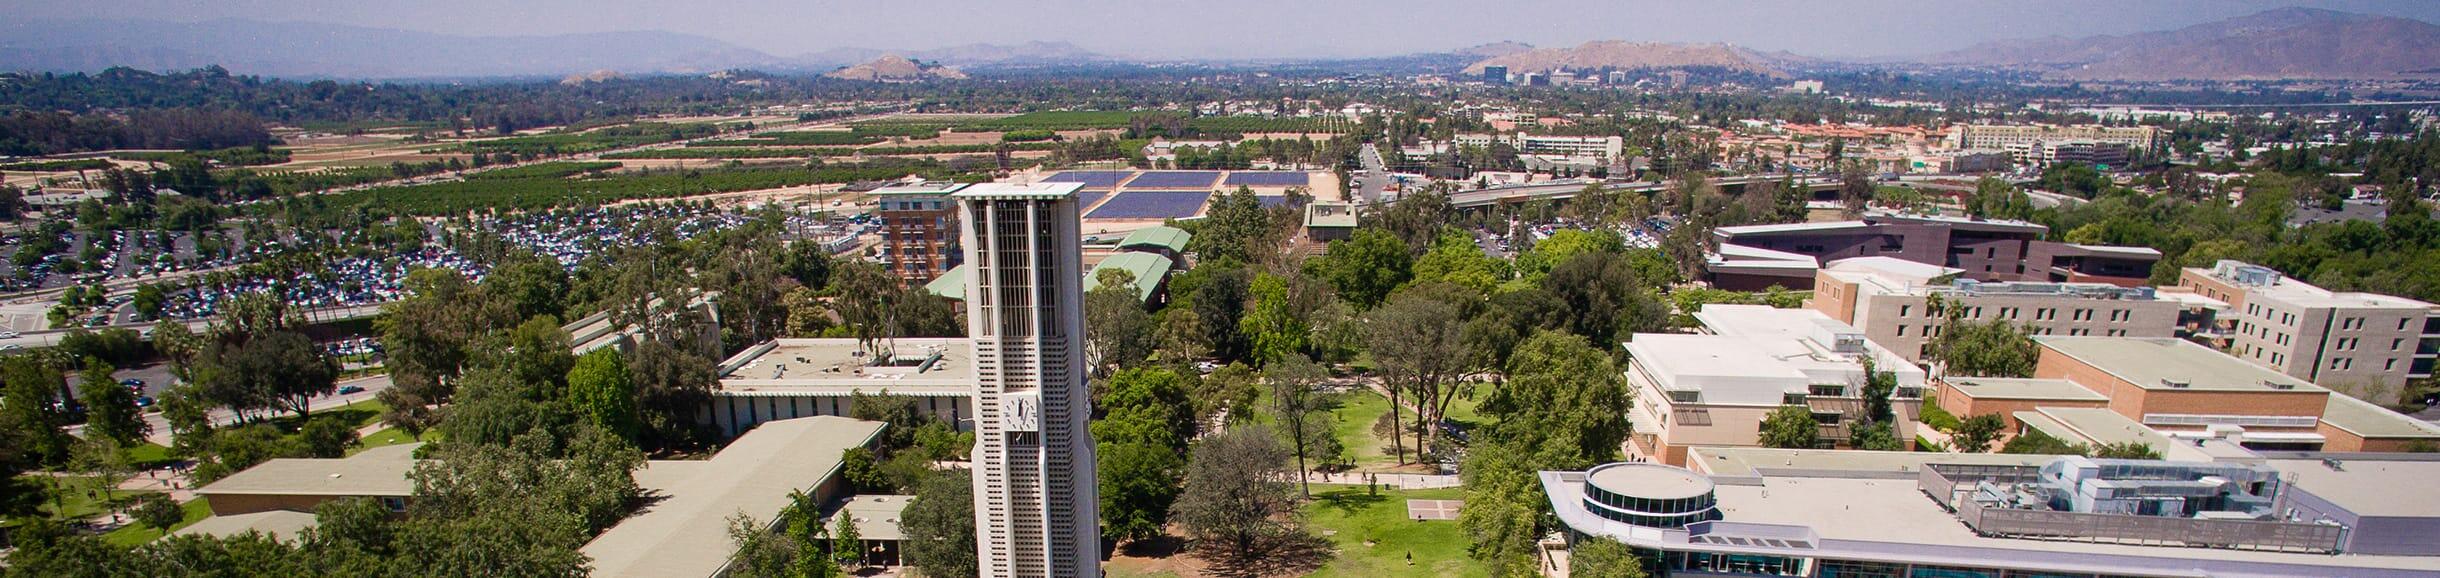 Aerial view of UC Riverside campus with bell tower in front view